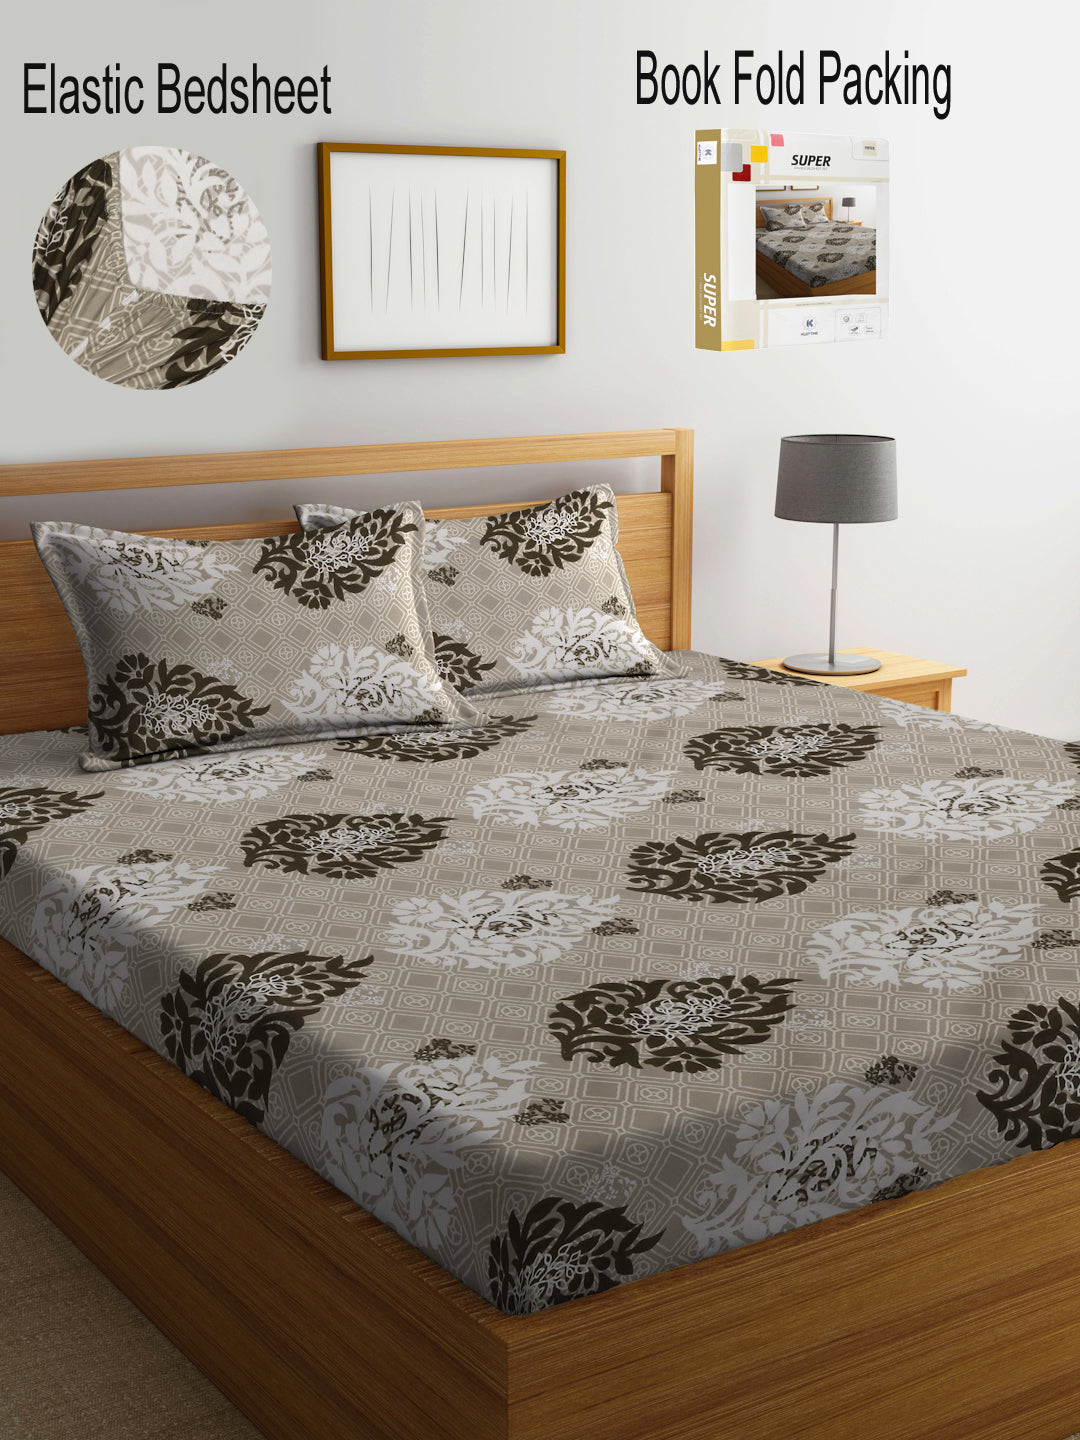 Klotthe Multi Abstract 300 TC Cotton Blend Fitted Double Bedsheet with 2 Pillow Covers in Book Fold Packing